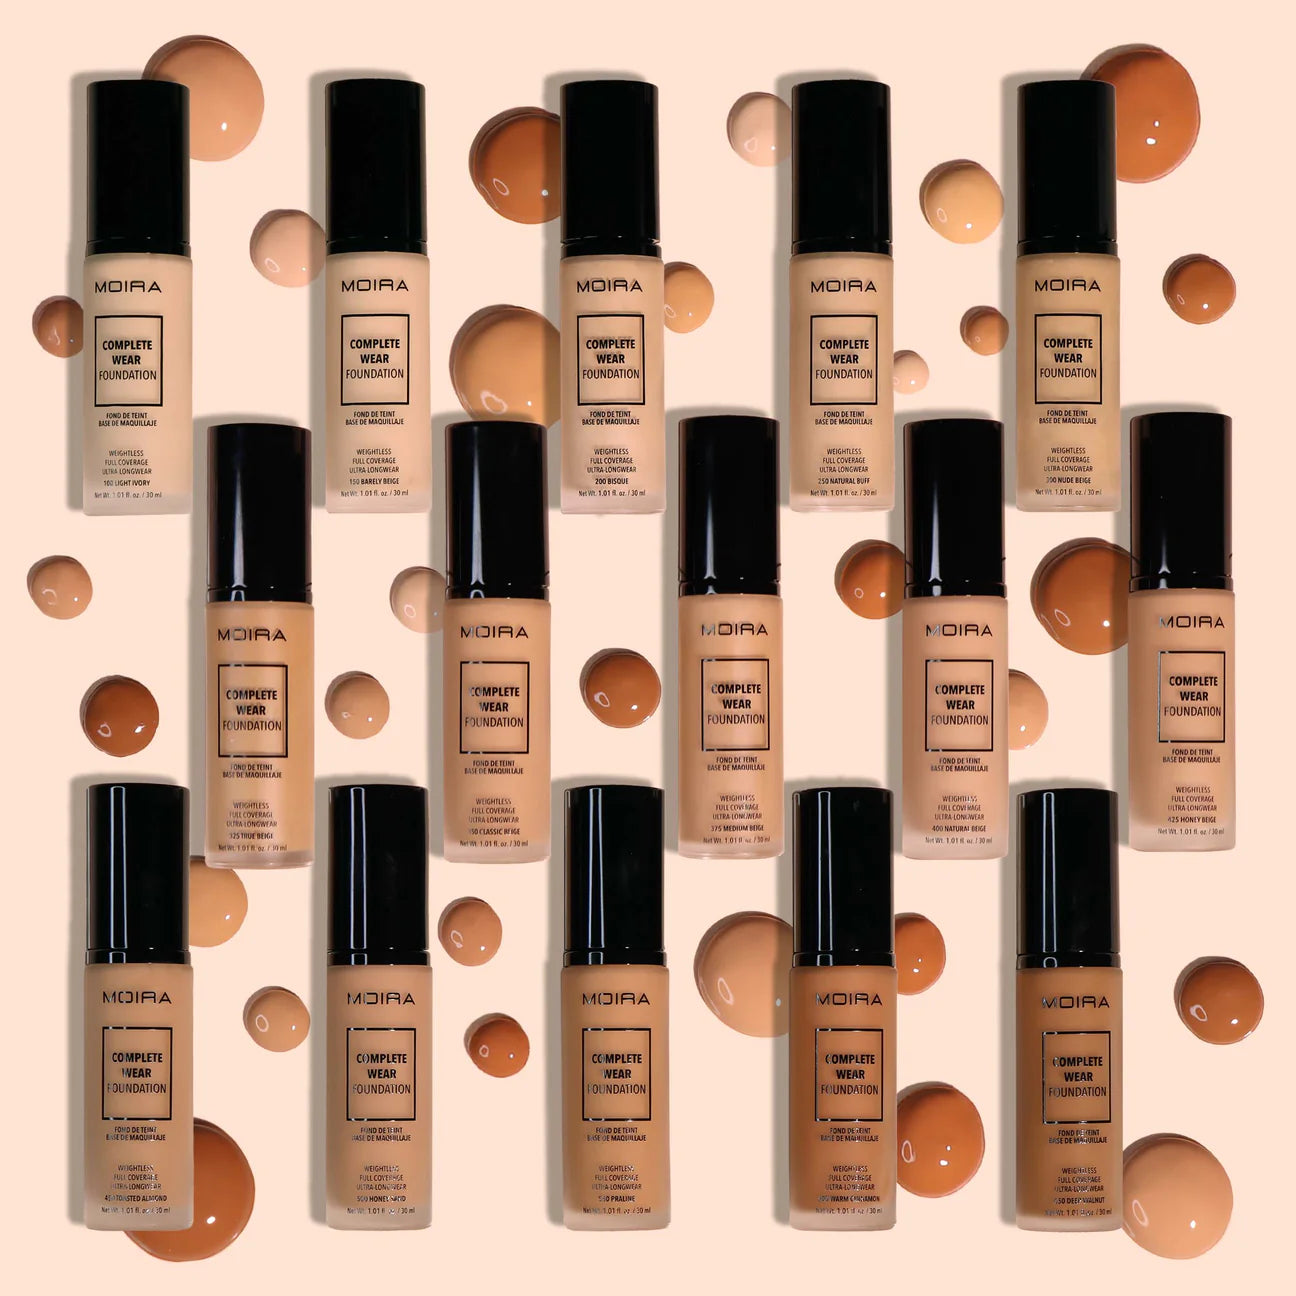 Moira Complete Wear Foundation 350 (Classic Beige)